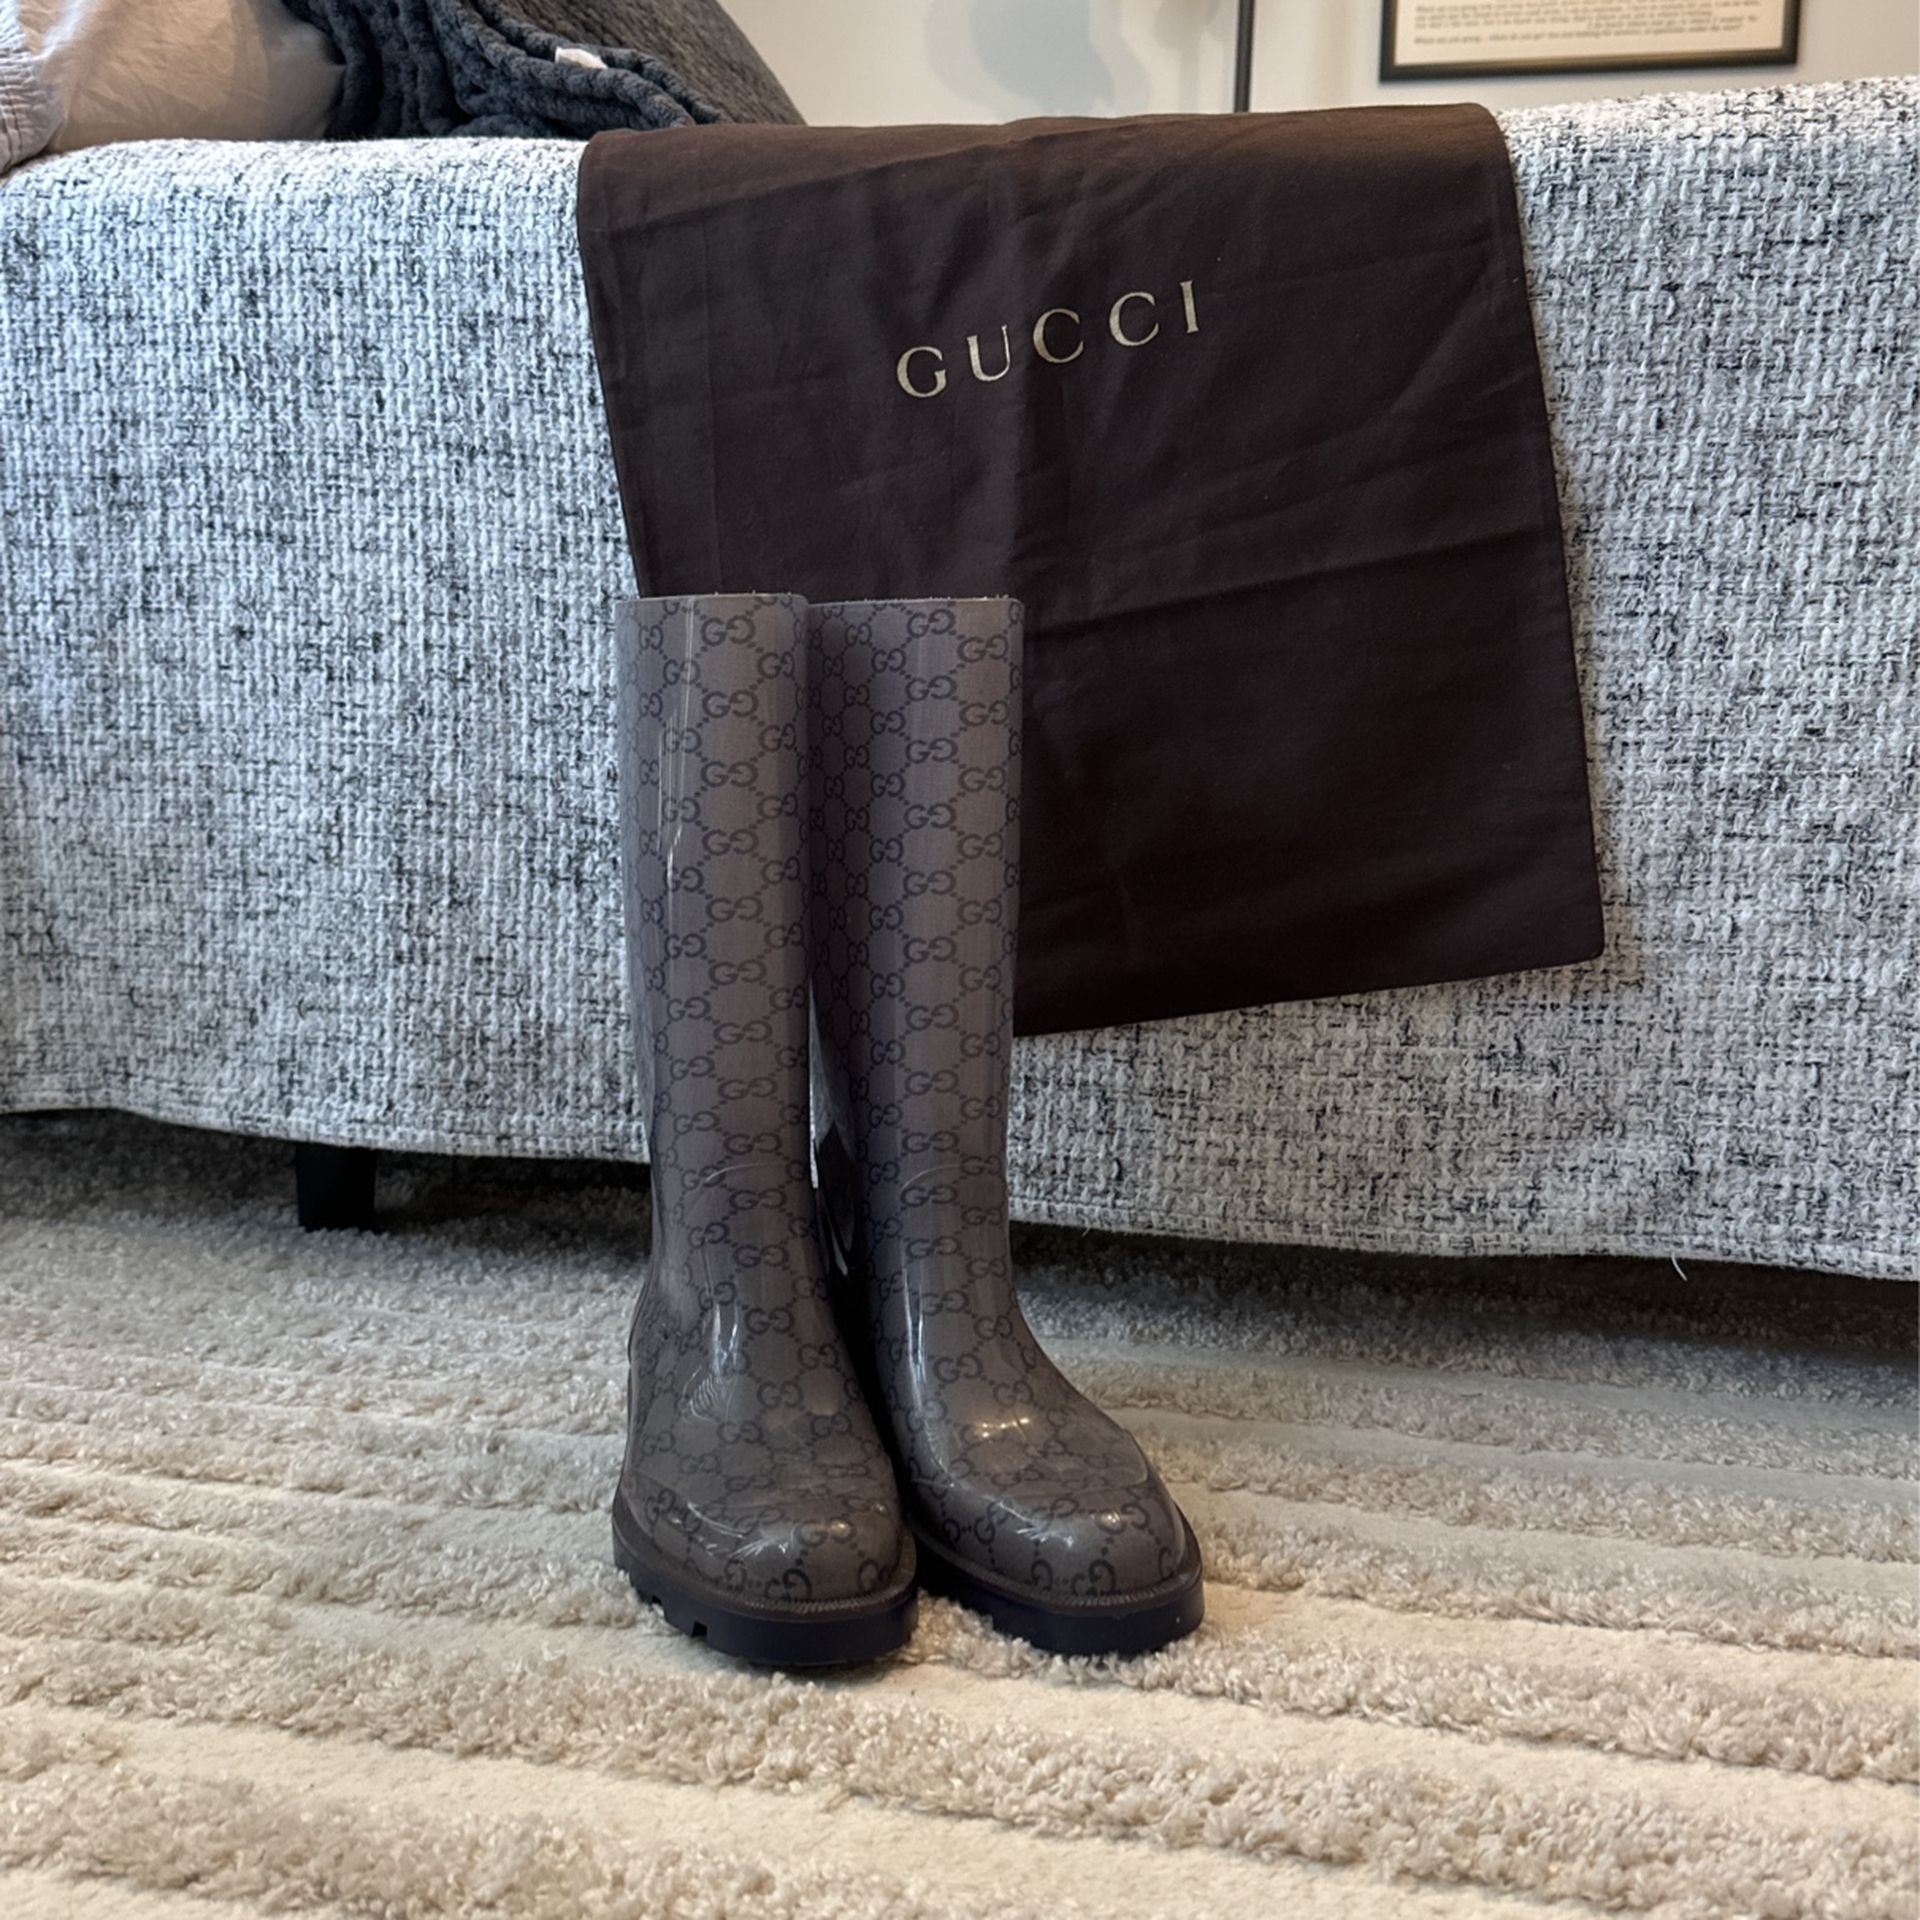 Gucci Size 38 - US  7 1/2 Women’s Rain boots with Bag